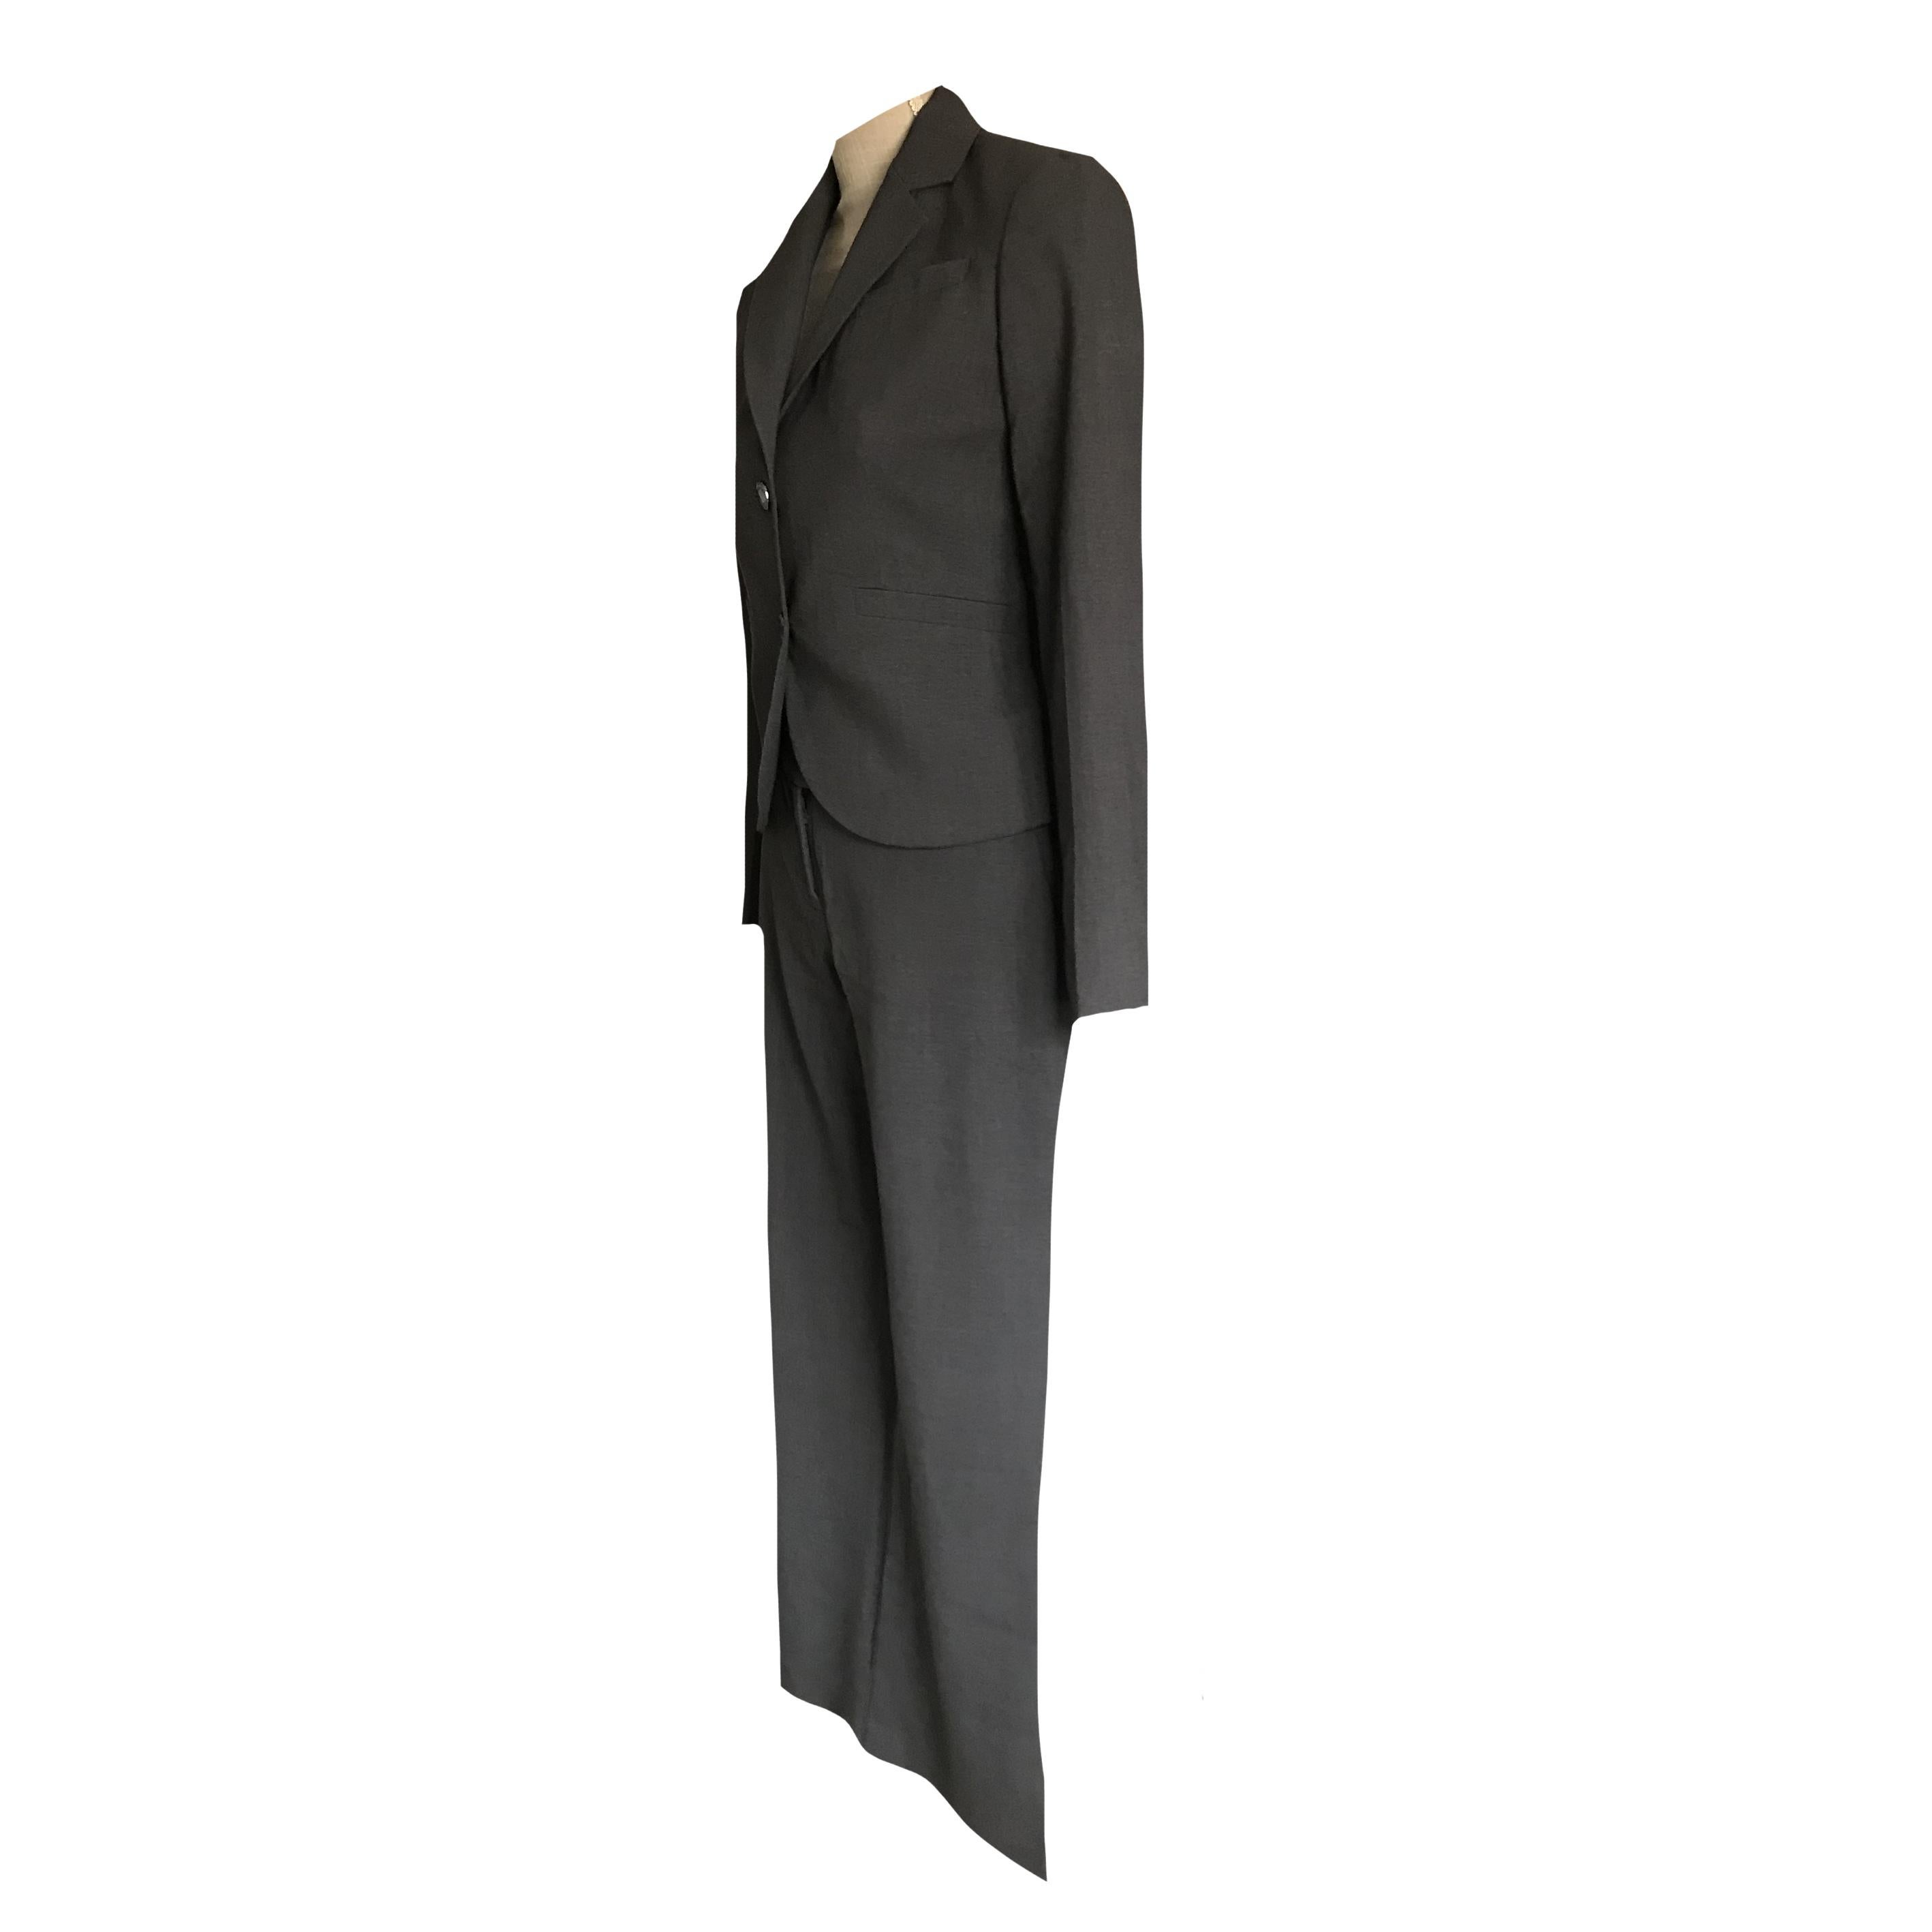 CK 00S Anthracite suit

 

Tag CK

 

 

Size S

TAILORED JACKET

Shoulder 37cm

Chest 37cm

Length 50cm

Sleeve 50cm

2 buttons on the front

2 fake pockets 

 

 

TROUSER

Waist 37cm

Length 90cm

2 front pockets

2 fake pockets on the